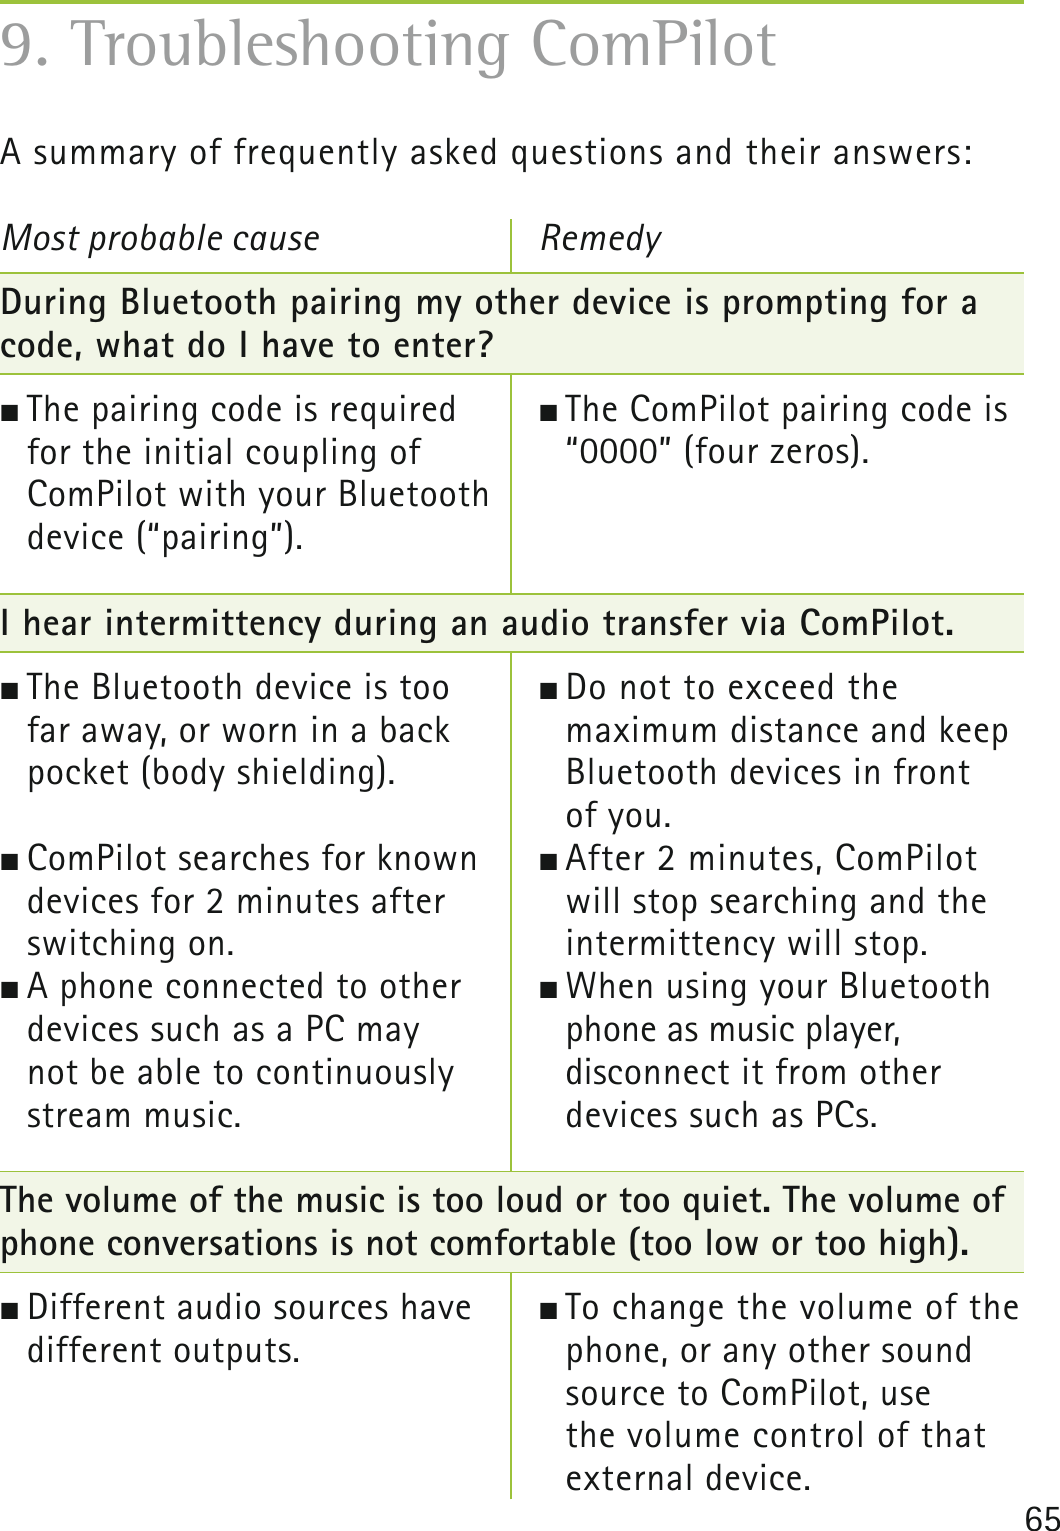 659. Troubleshooting ComPilotA summary of frequently asked questions and their answers:Most probable cause During Bluetooth pairing my other device is prompting for a code, what do I have to enter? The pairing code is required  for the initial coupling of  ComPilot with your Bluetooth device (“pairing”).  I hear intermittency during an audio transfer via ComPilot. The Bluetooth device is too  far away, or worn in a back  pocket (body shielding).  ComPilot searches for known devices for 2 minutes after  switching on.  A phone connected to other  devices such as a PC may  not be able to continuously  stream music.The volume of the music is too loud or too quiet. The volume of phone conversations is not comfortable (too low or too high). Different audio sources have different outputs.Remedy The ComPilot pairing code is “0000” (four zeros). Do not to exceed the  maximum distance and keep Bluetooth devices in front  of you. After 2 minutes, ComPilot will stop searching and the intermittency will stop.  When using your Bluetooth phone as music player,  disconnect it from other  devices such as PCs.  To change the volume of the phone, or any other sound source to ComPilot, use  the volume control of that external device.